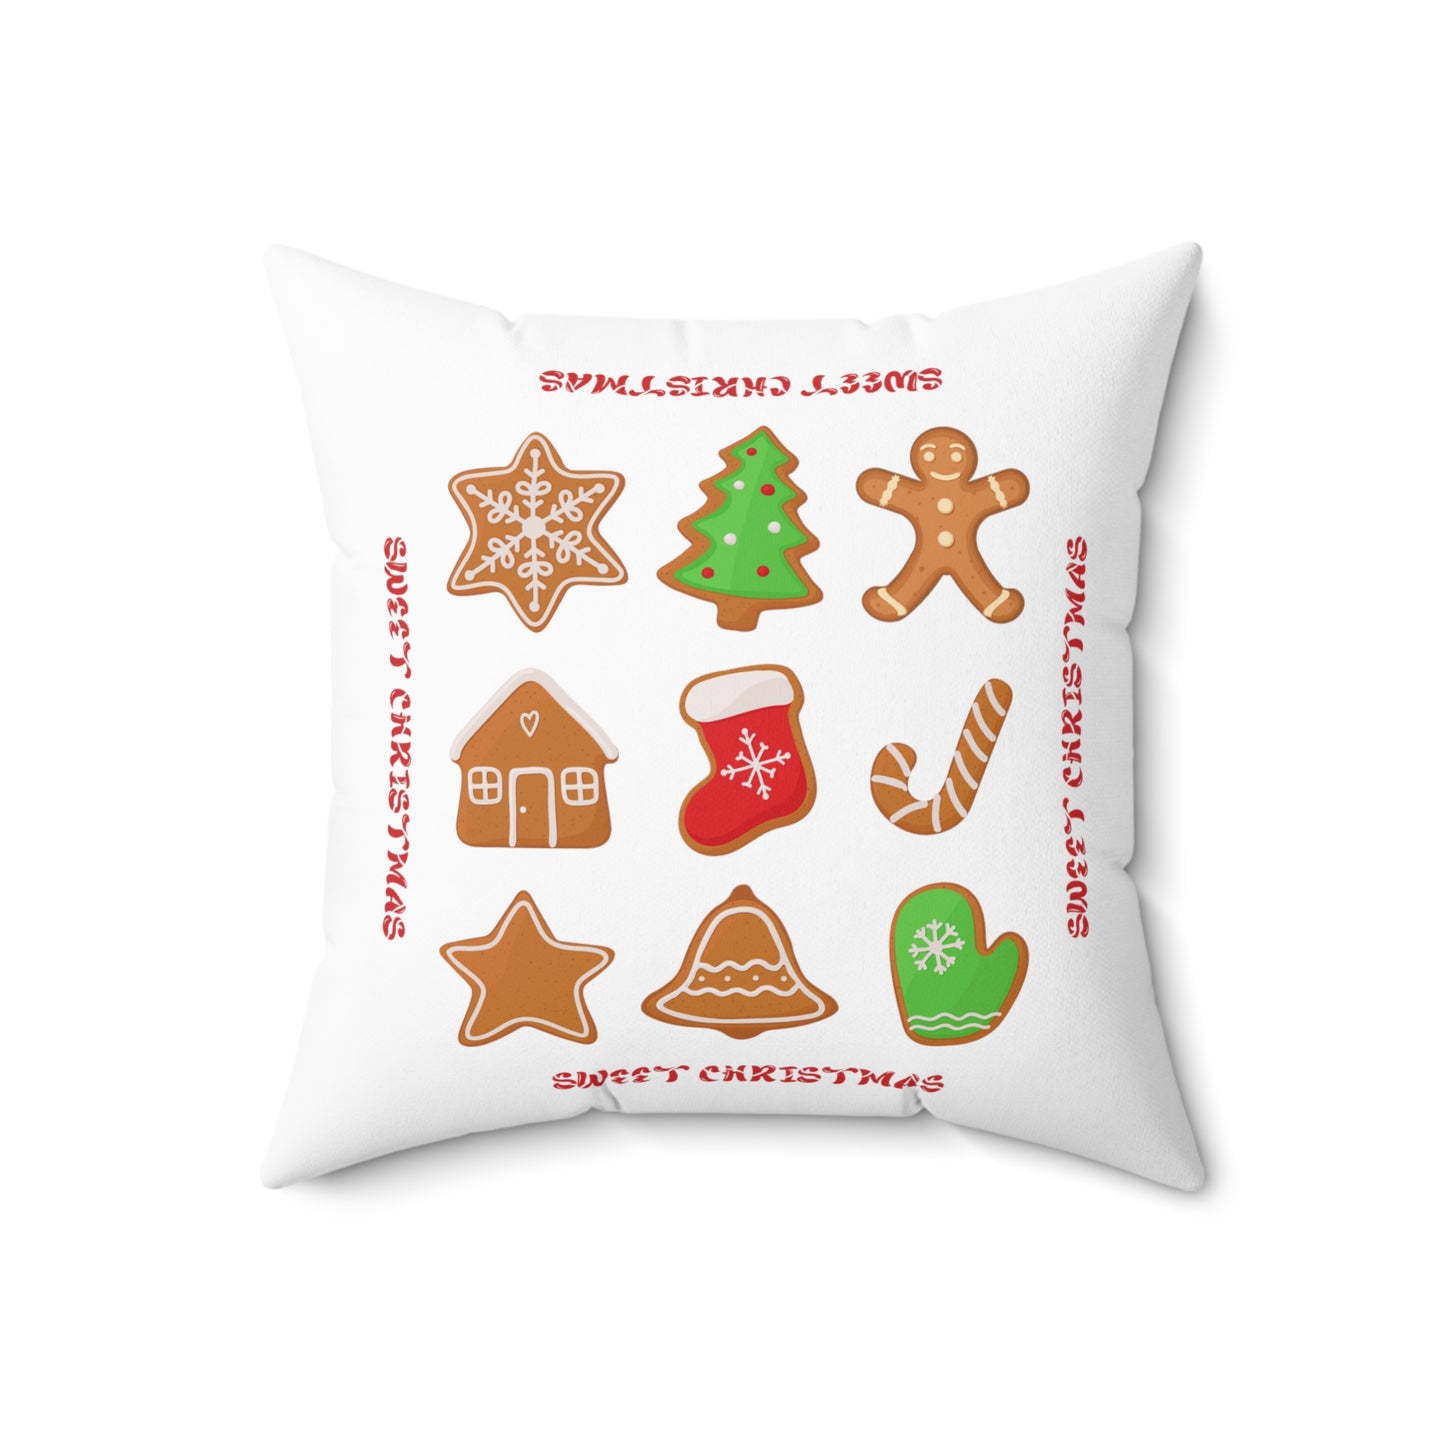 Christmas Ornaments Printed Polyester Square Pillow, White